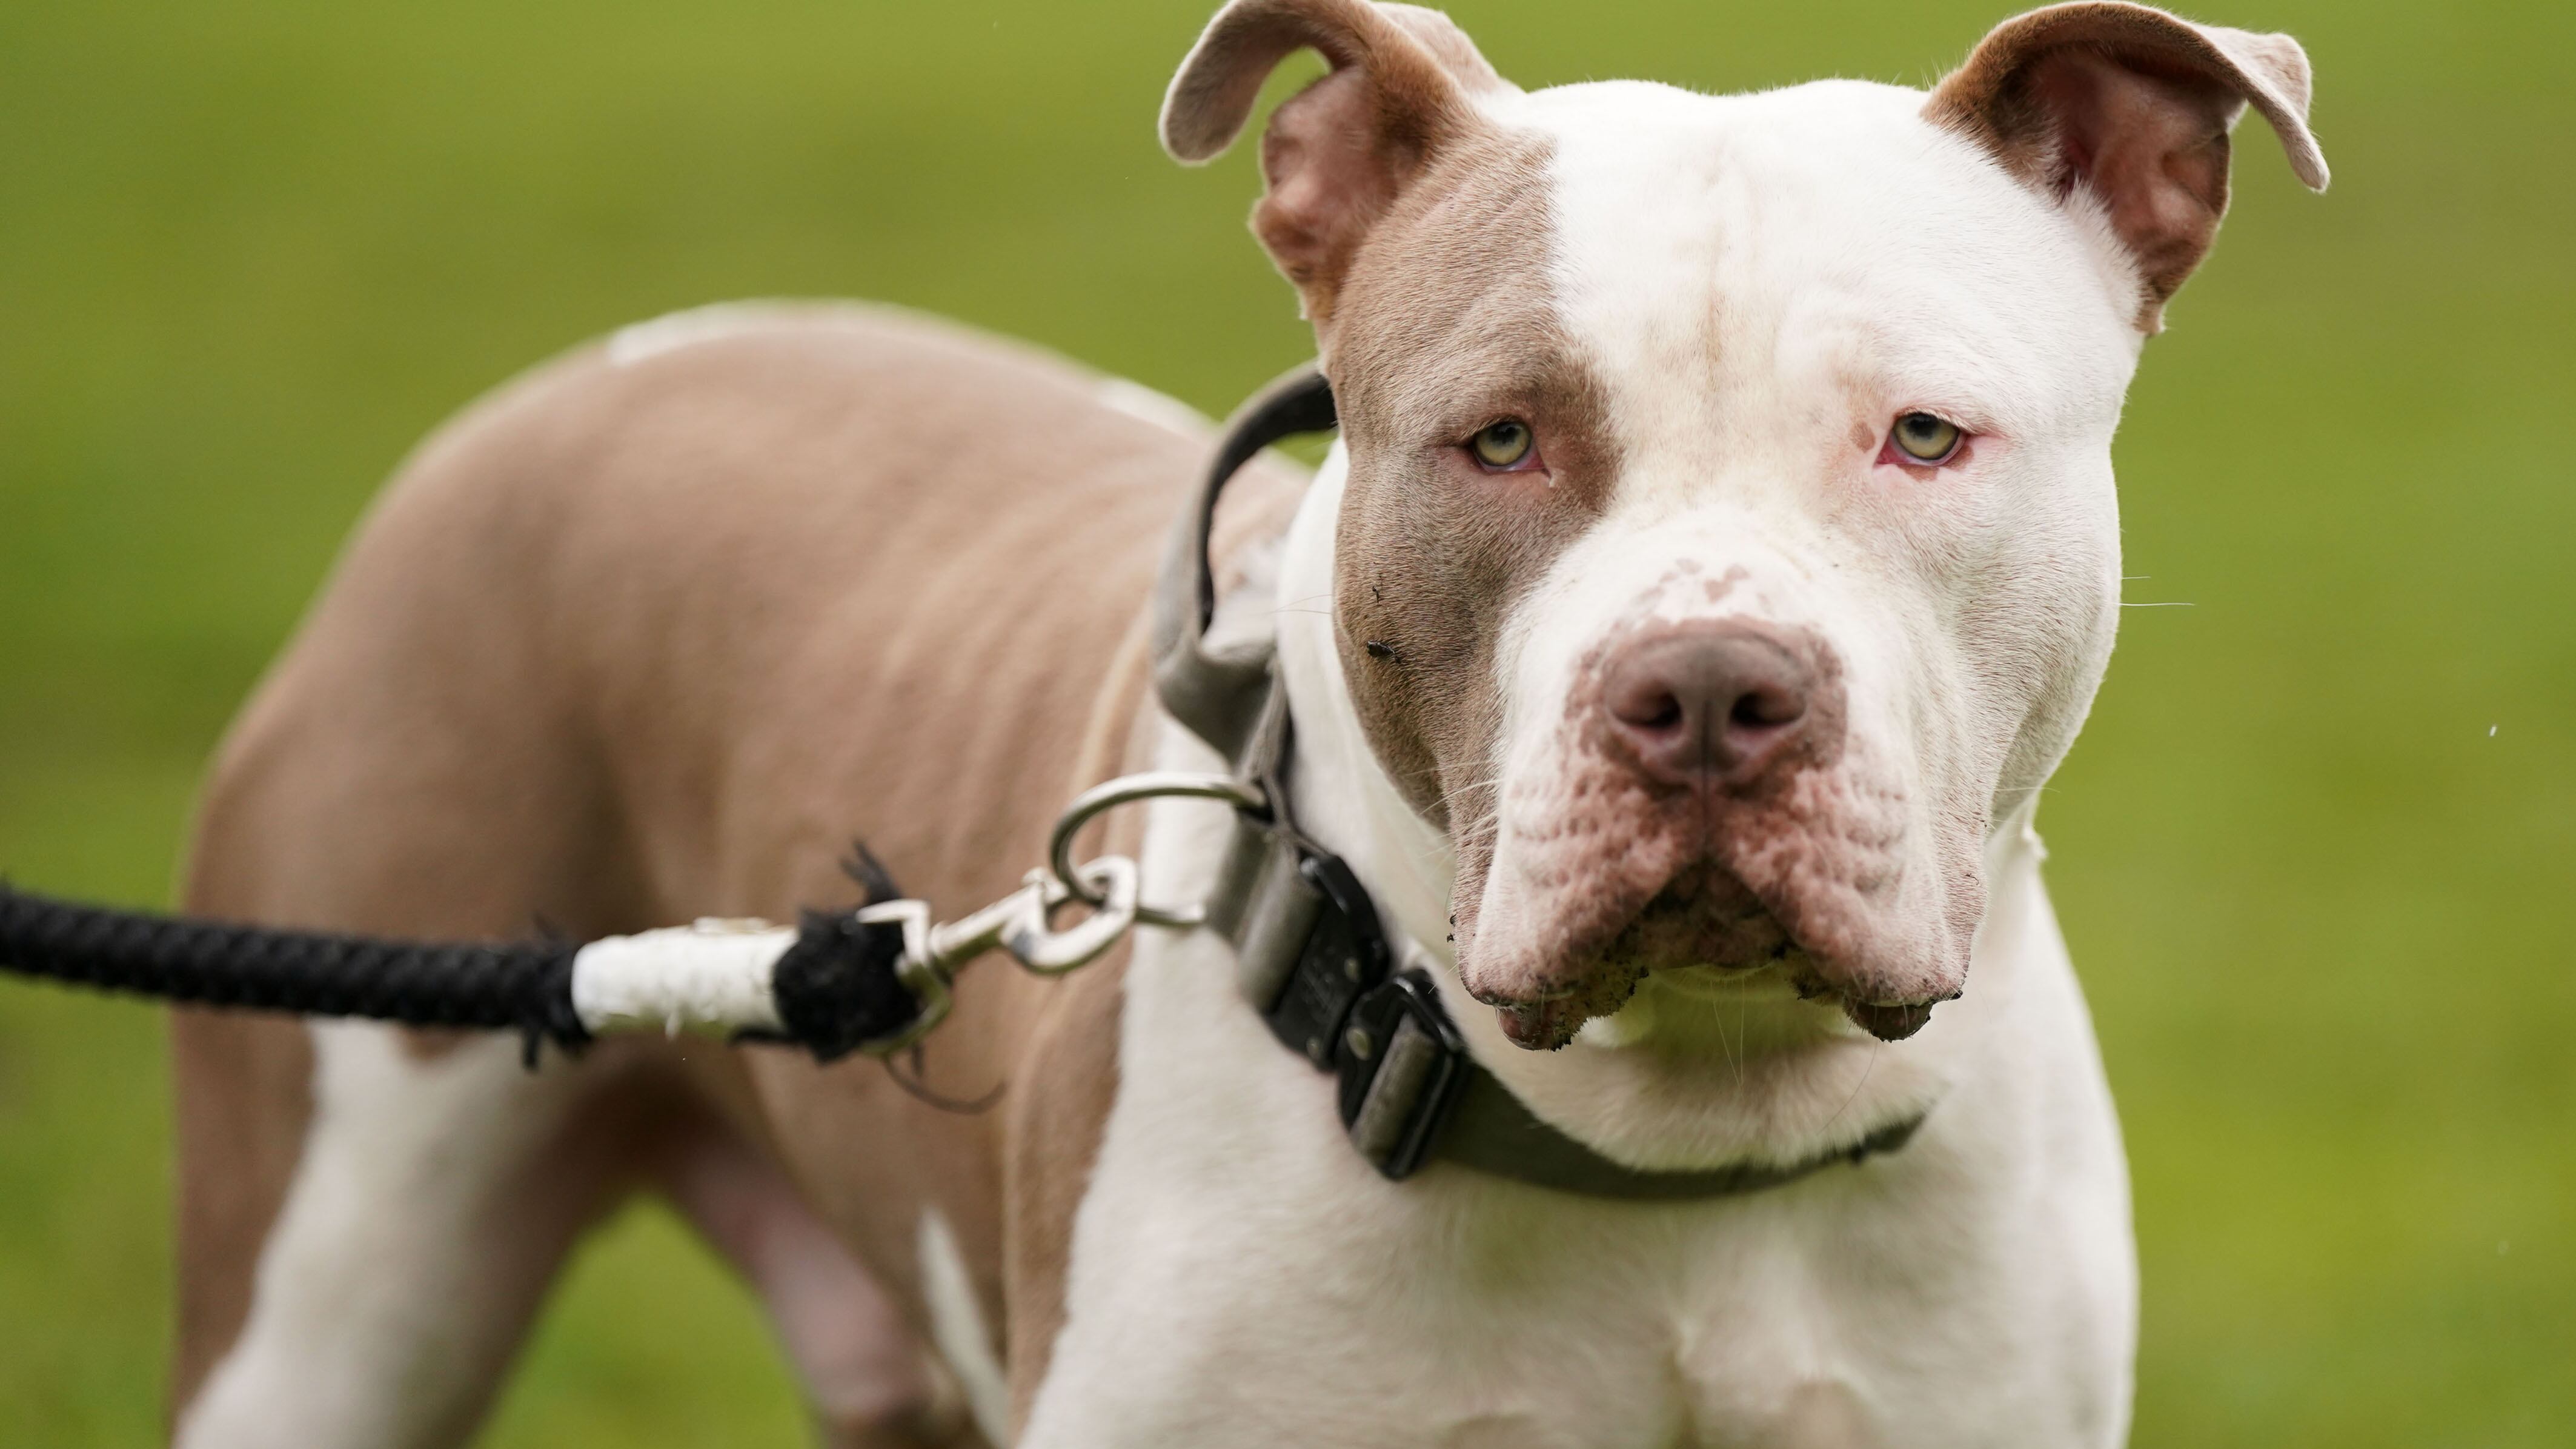 From February 1, it became a criminal offence to own the XL bully breed in England and Wales without an exemption certificate